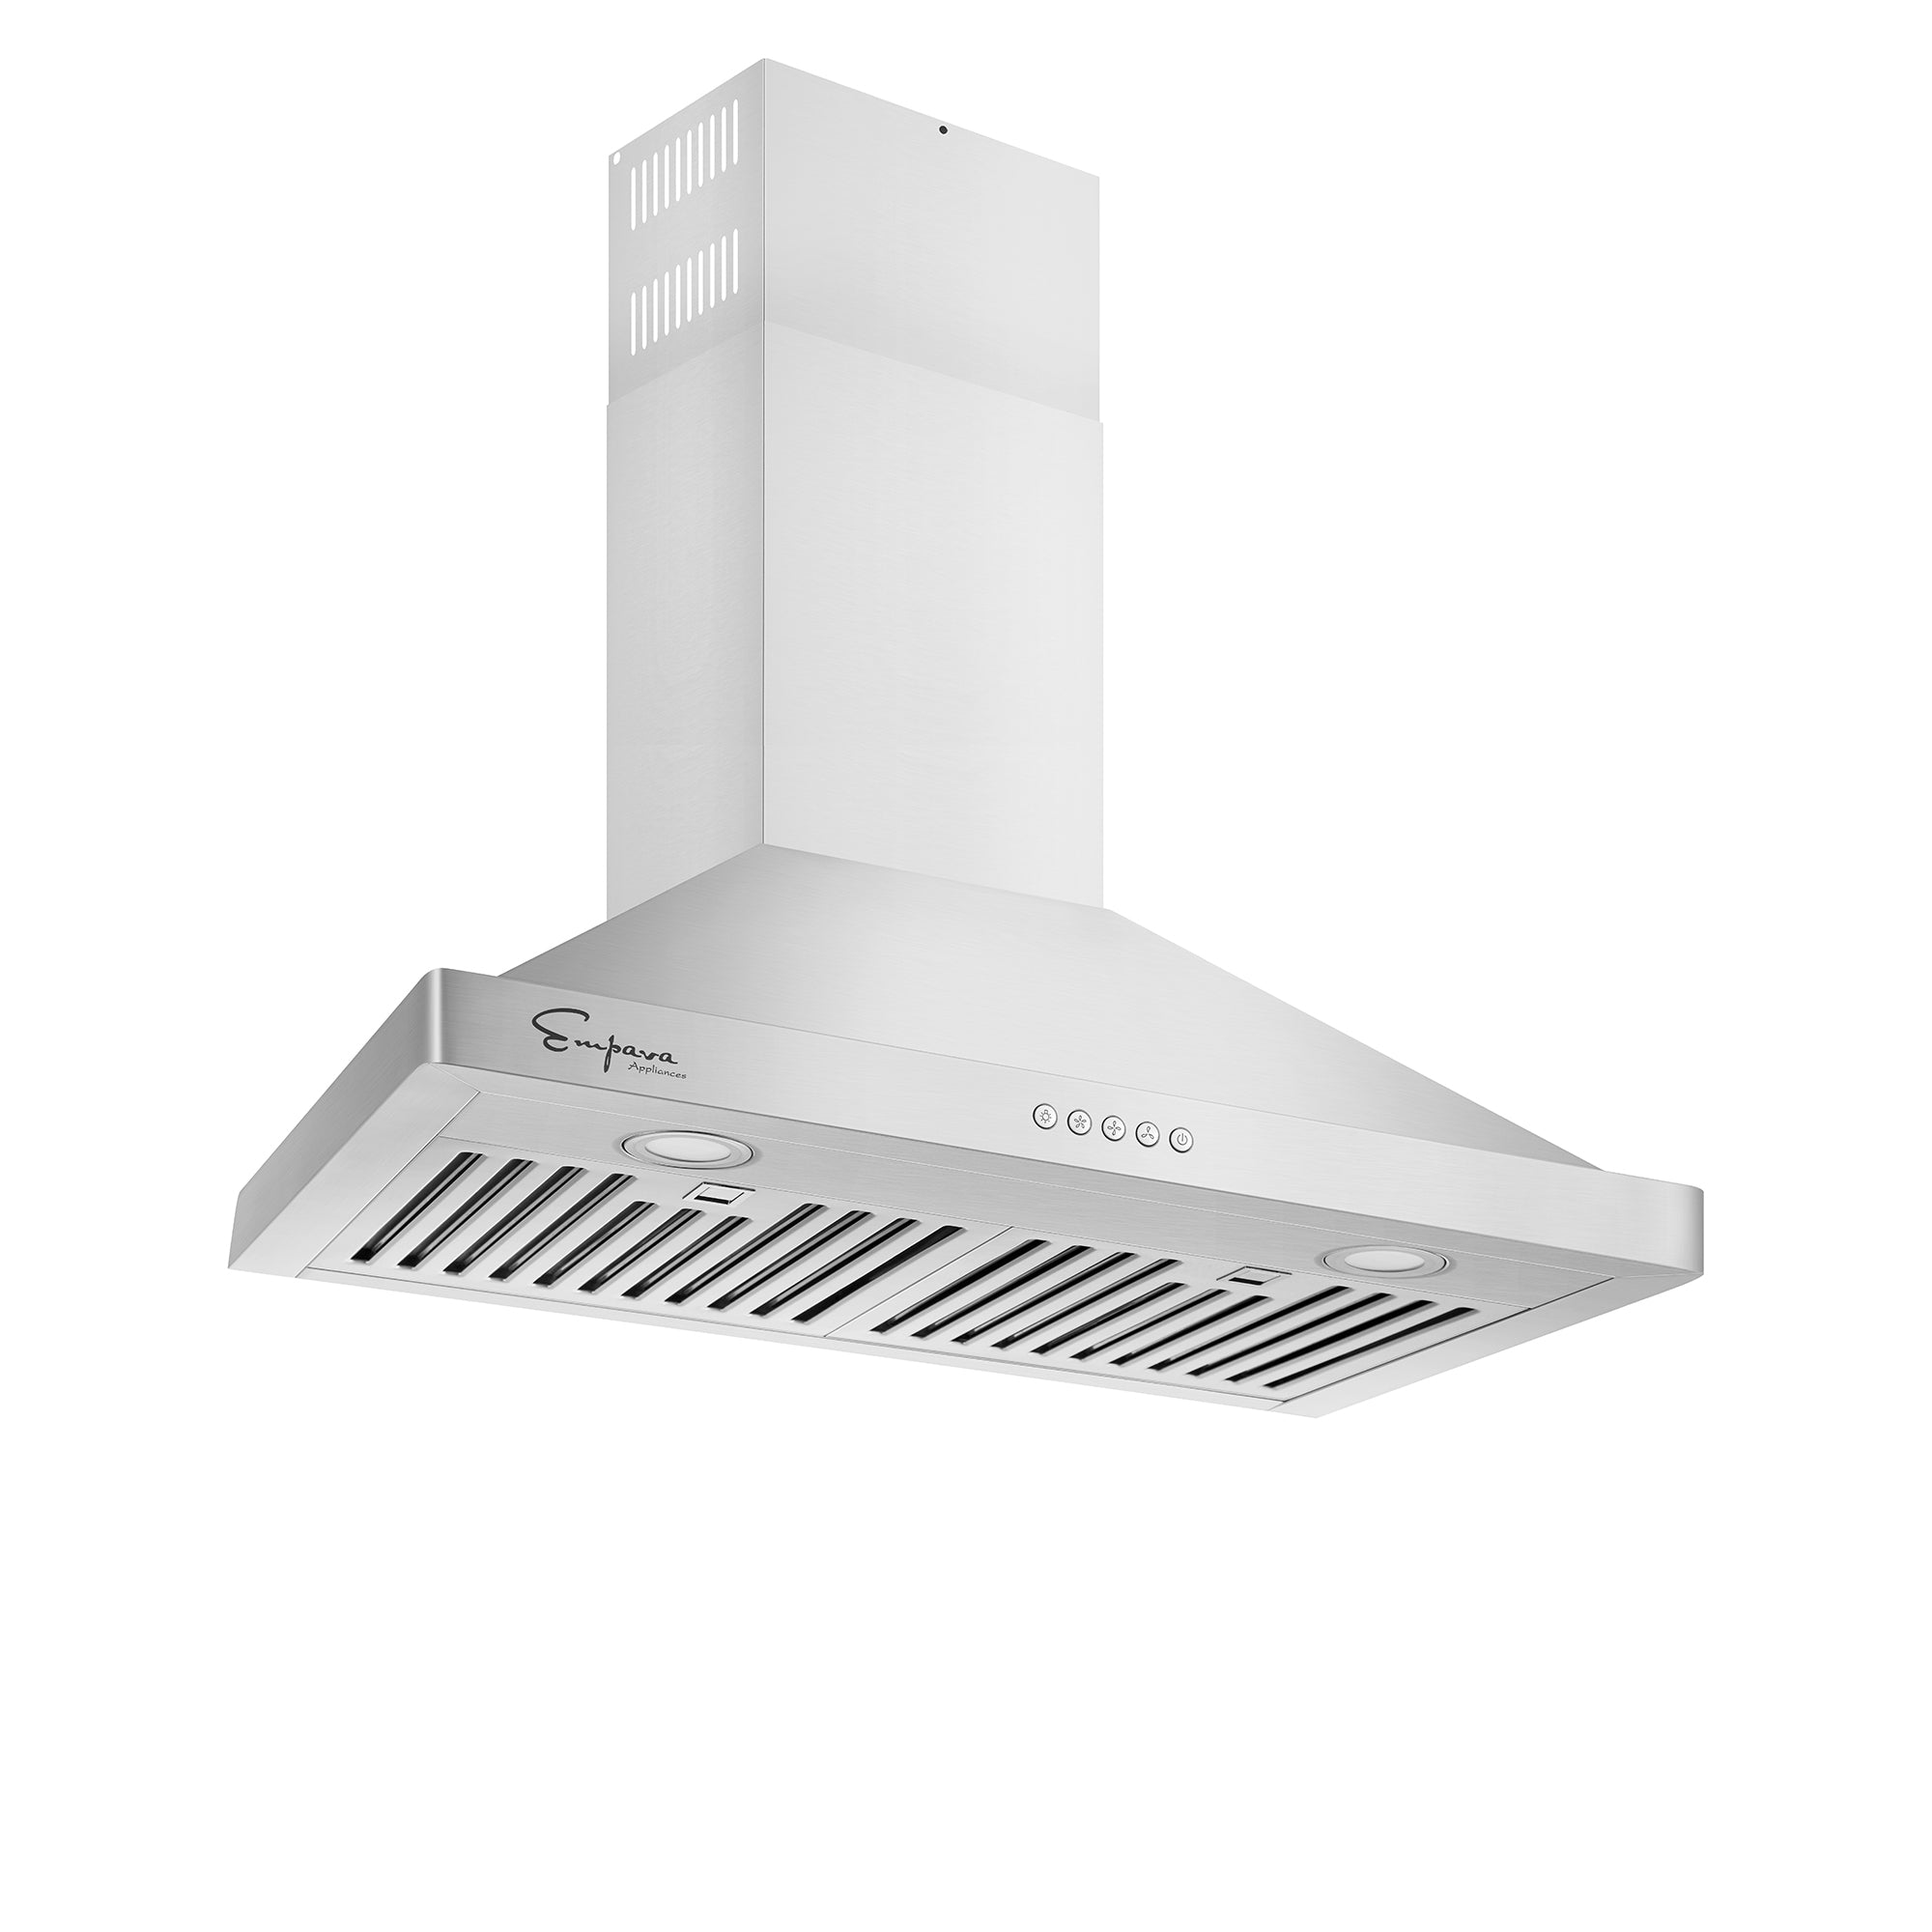 SNDOAS 30 inch Range Hood | Black Stainless Steel Kitchen Vent Hood |  Ducted/Ductless Convertible Chimney-Style Wall Mount Range Hood with  3-Speed